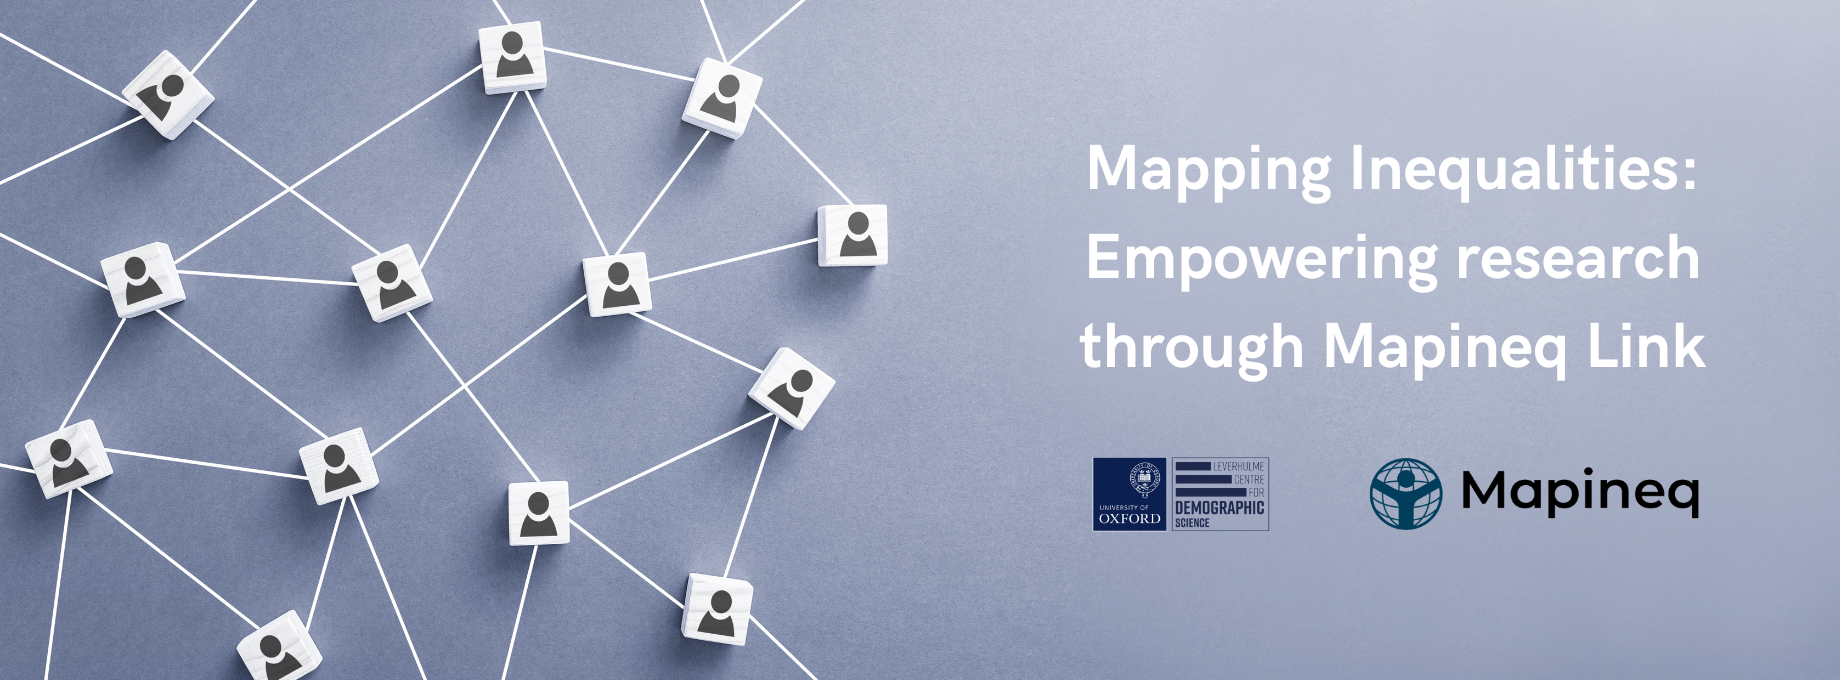 Mapping Inequalities: Empowering research through Mapineq Link